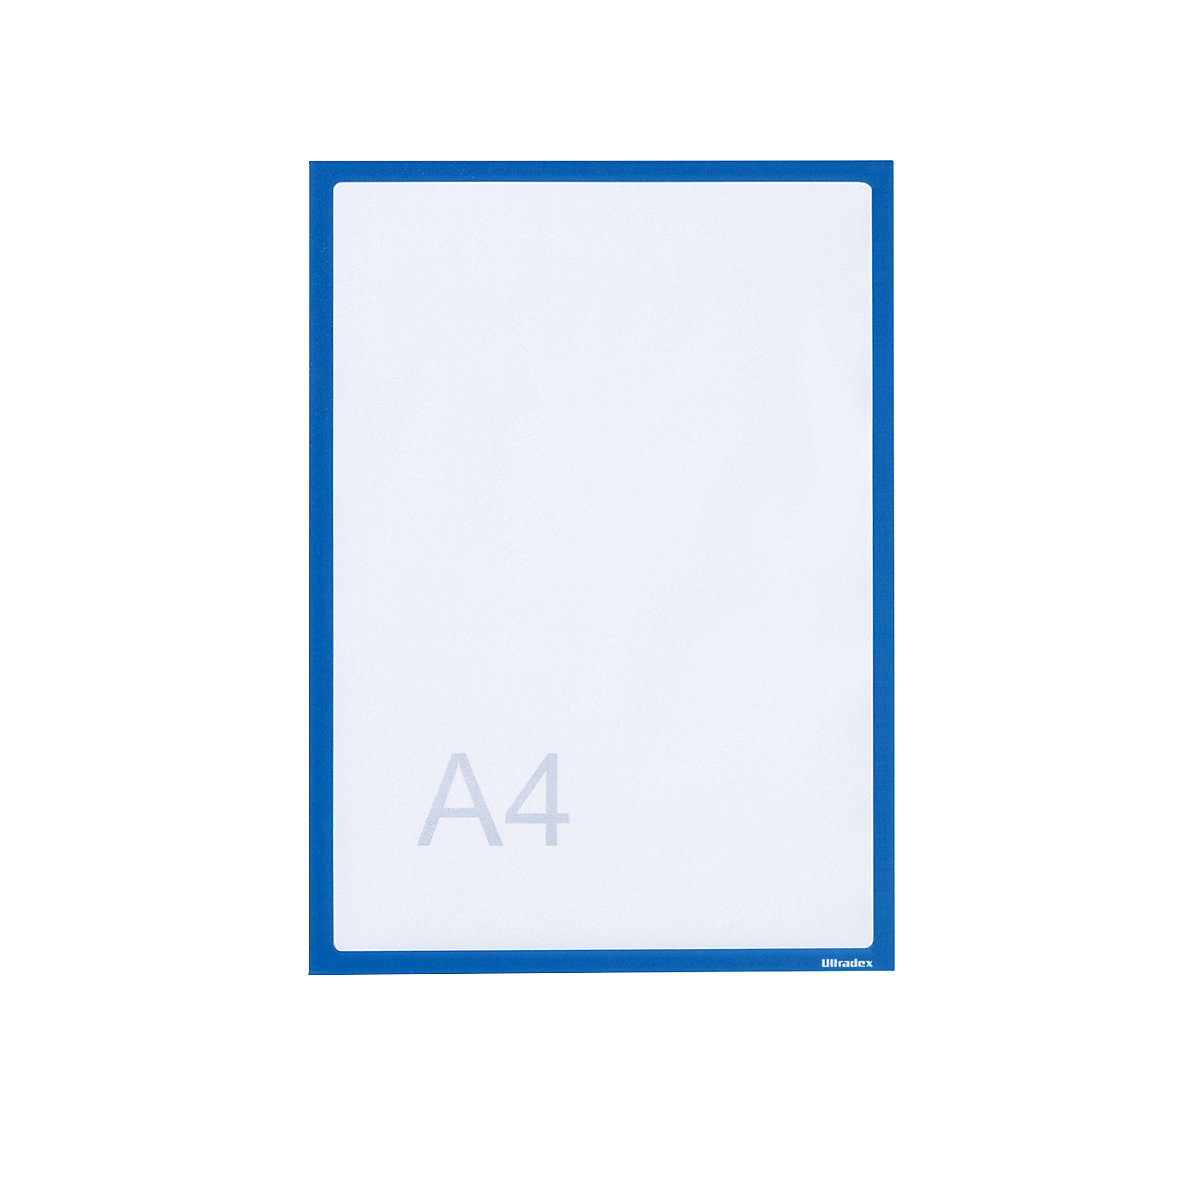 Display pockets for adhesive attachment, A4, WxH 225 x 312 mm, blue frame, pack of 25-4